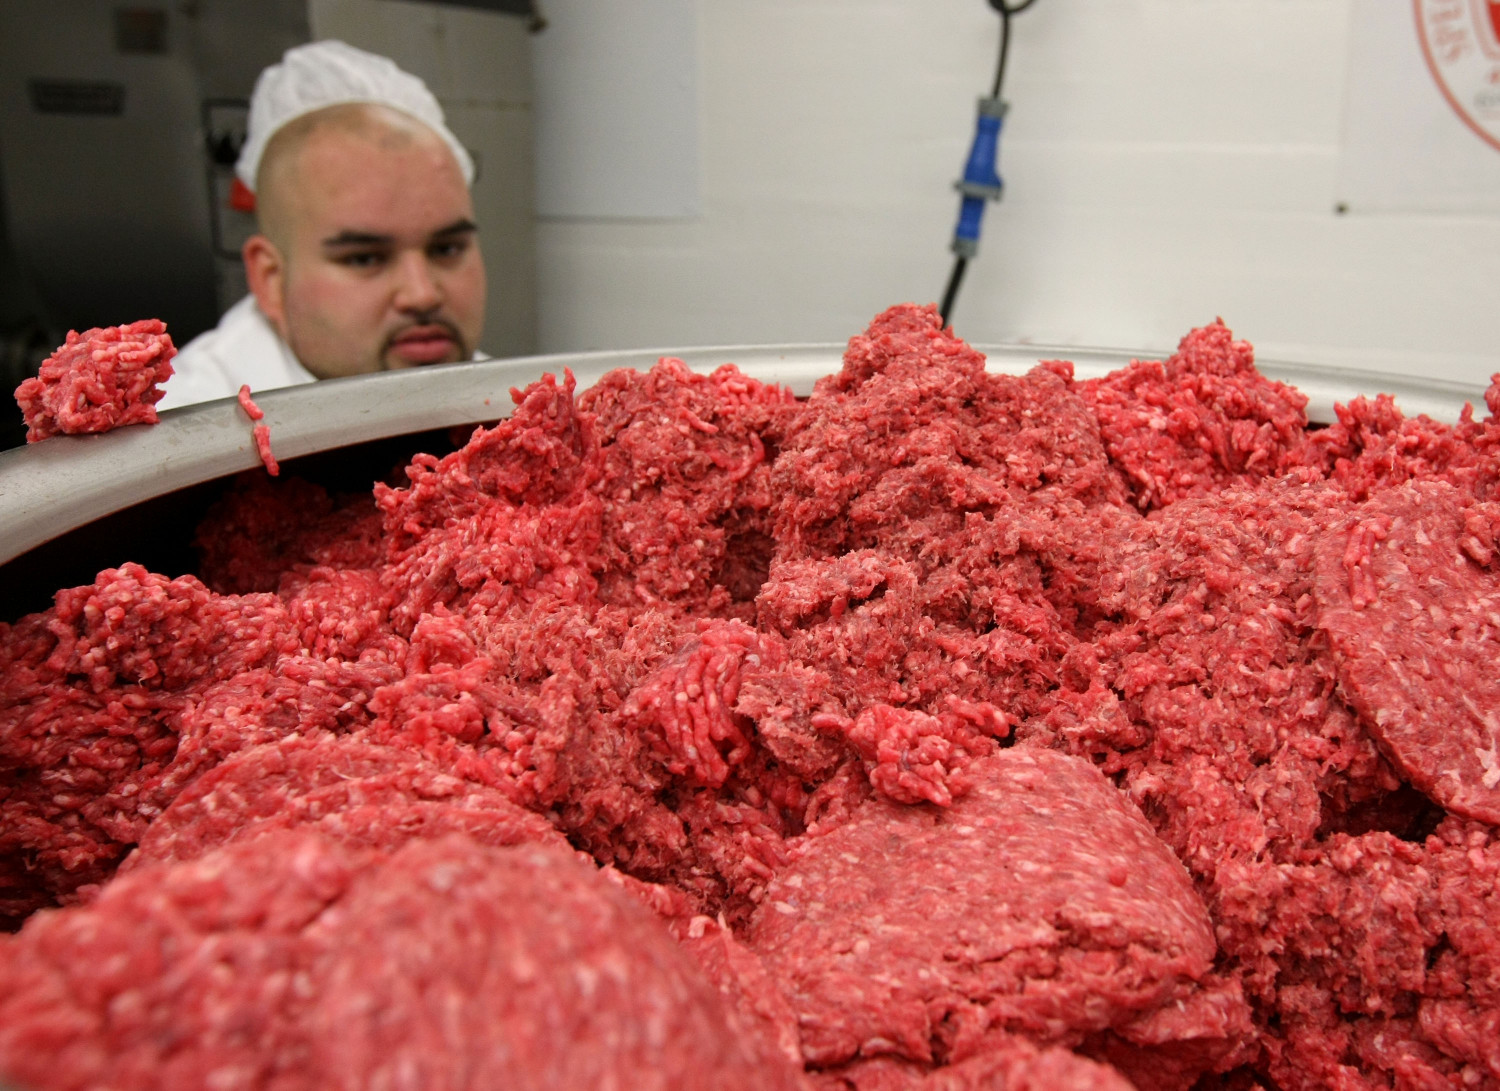 30,000 Pounds of Ground Beef Recalled for Possible Contamination